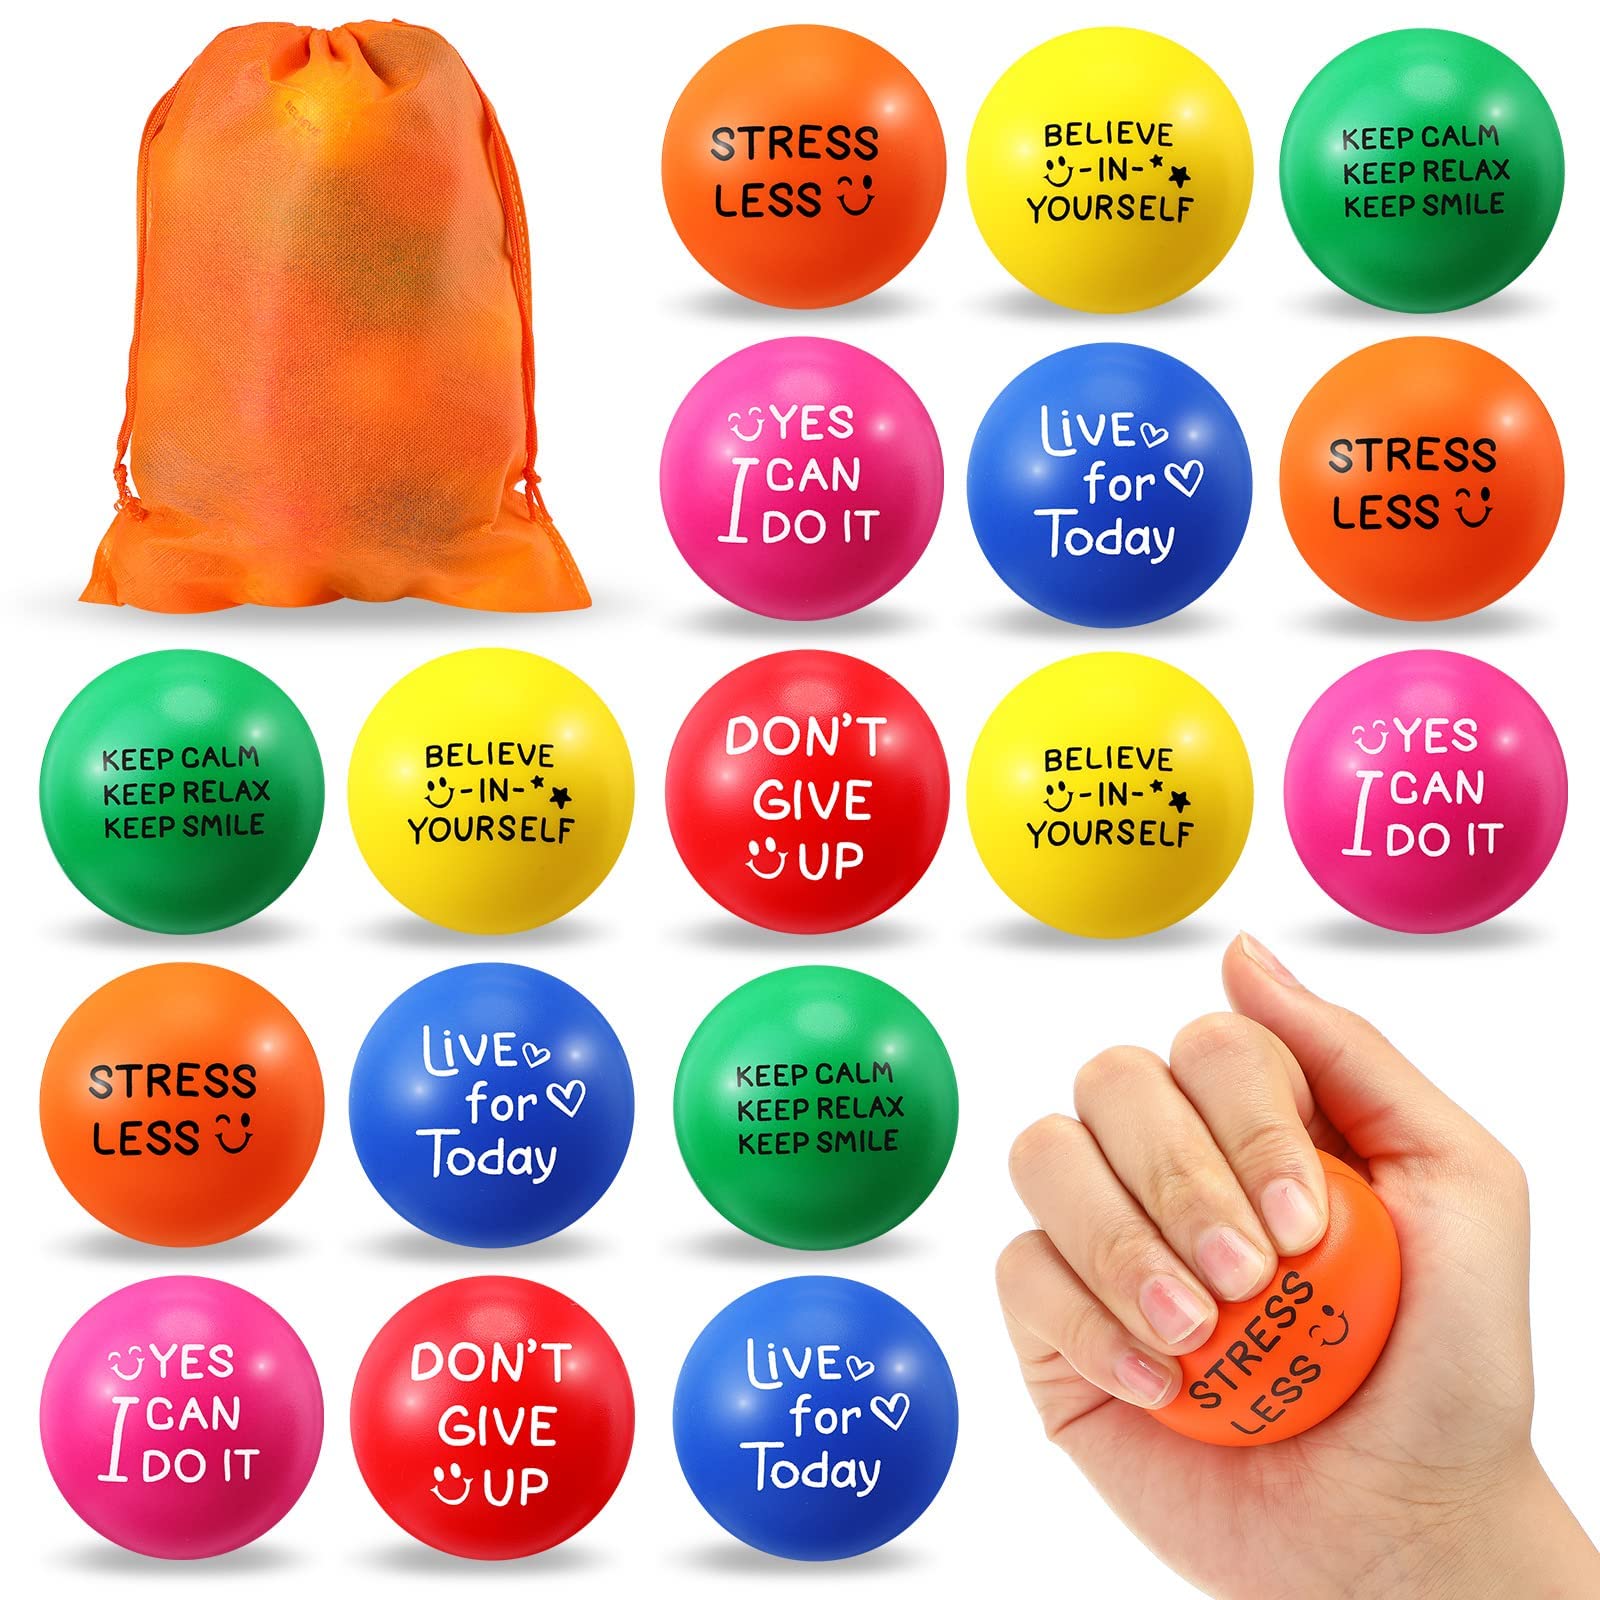 HyDren 48 Pieces Motivational Stress Balls 1.97 Inch Kids and Adults Stress Relief Ball Bulk Small Colorful Foam Balls Quetos to Relieve Anxiety and Manage Anger Hand Exercise Balls Multicolor